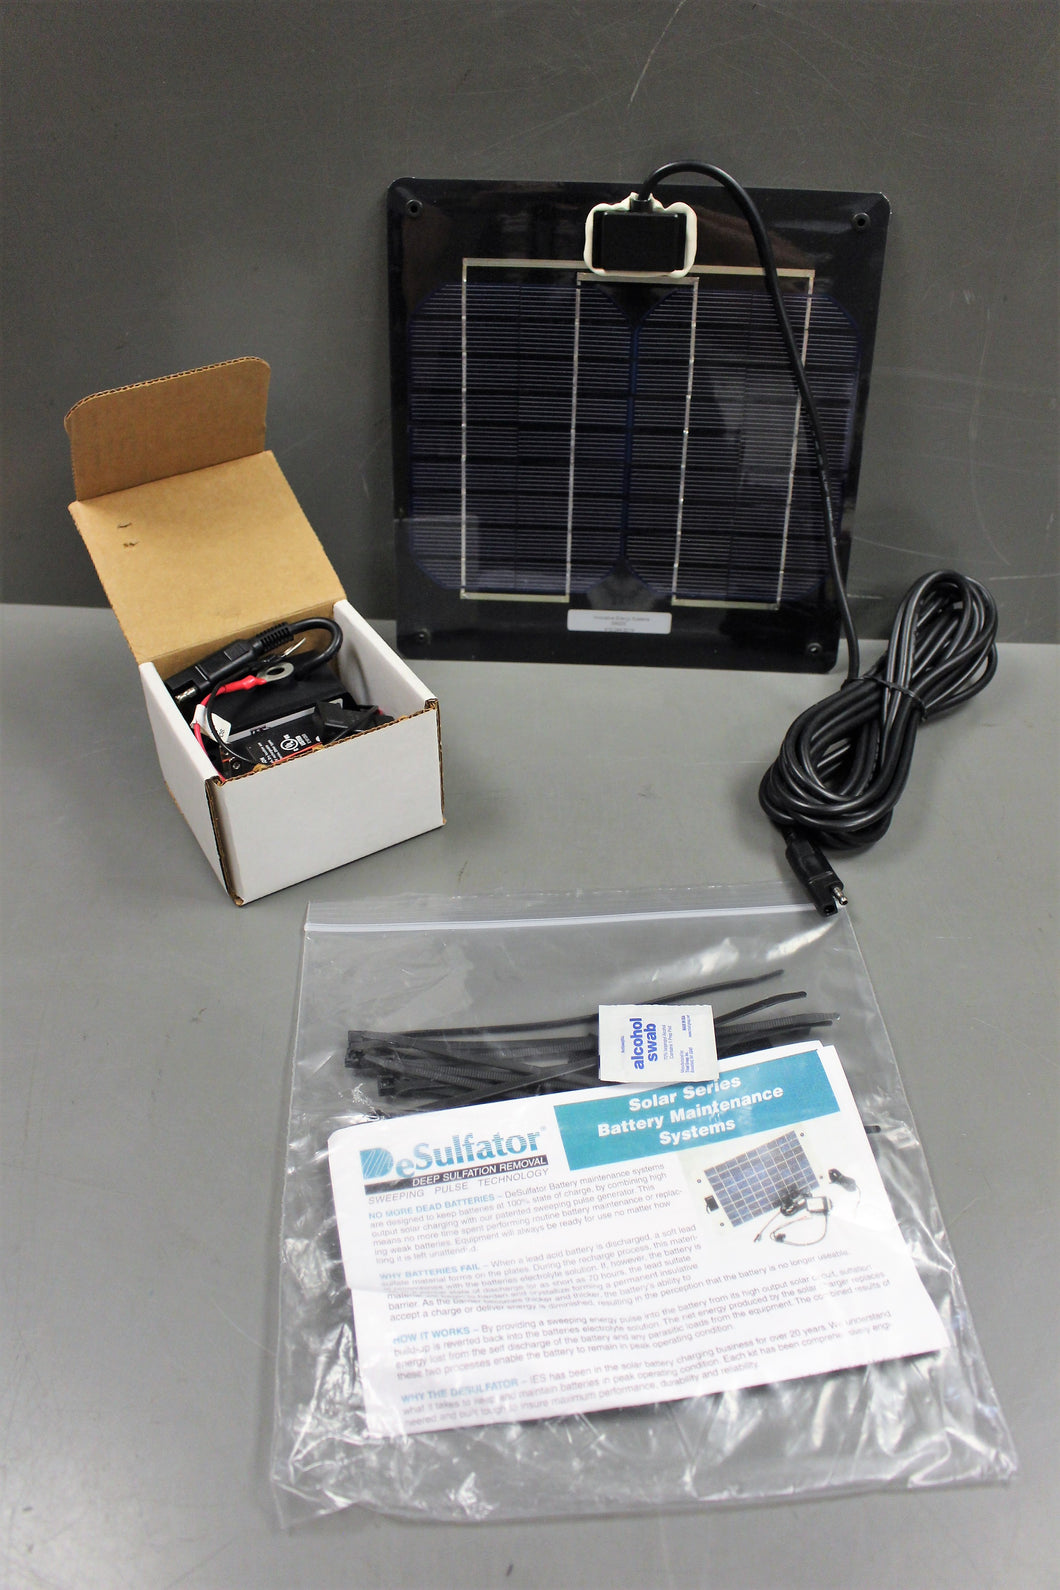 eSulfator Solar Series Battery Maintenance Systems, 6130-01-421-3768, S55A, New